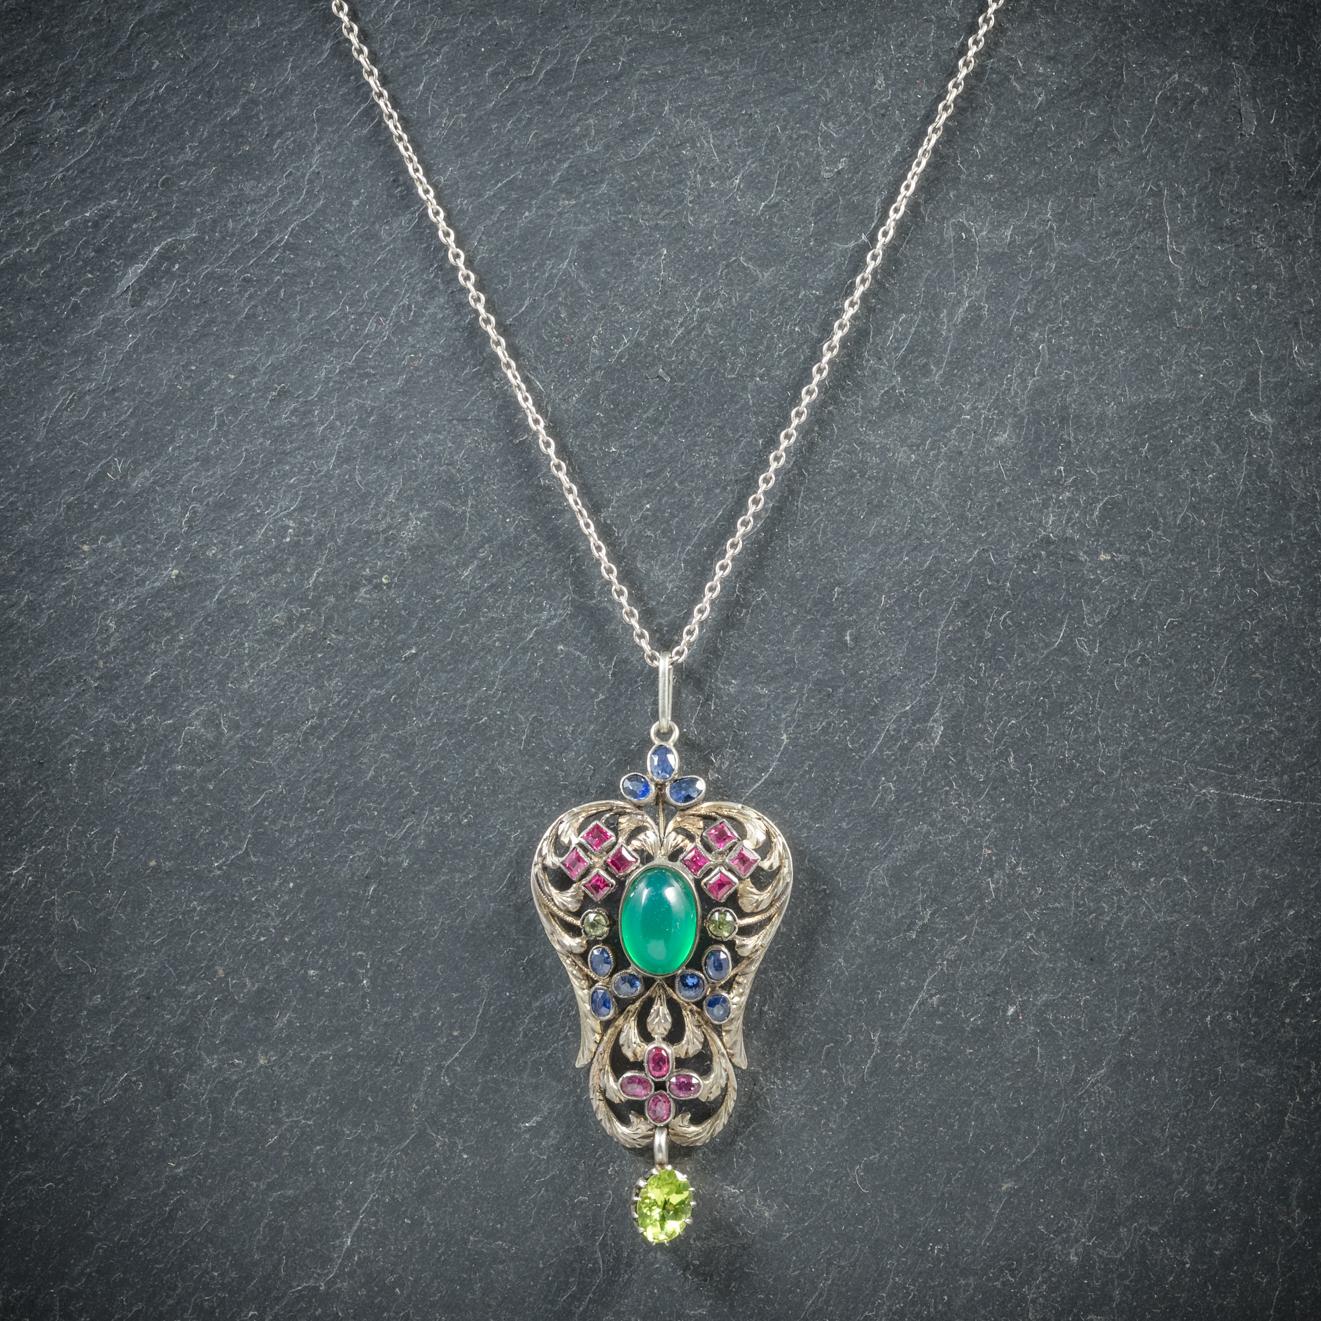 A stunning antique Gemstone pendant necklace from the Victorian era, Circa 1880

The beautiful pendant is decorated in pink Rubies, blue Sapphires, white Spinels with a bright green Peridot dangling below

Most striking is a stunning rich green